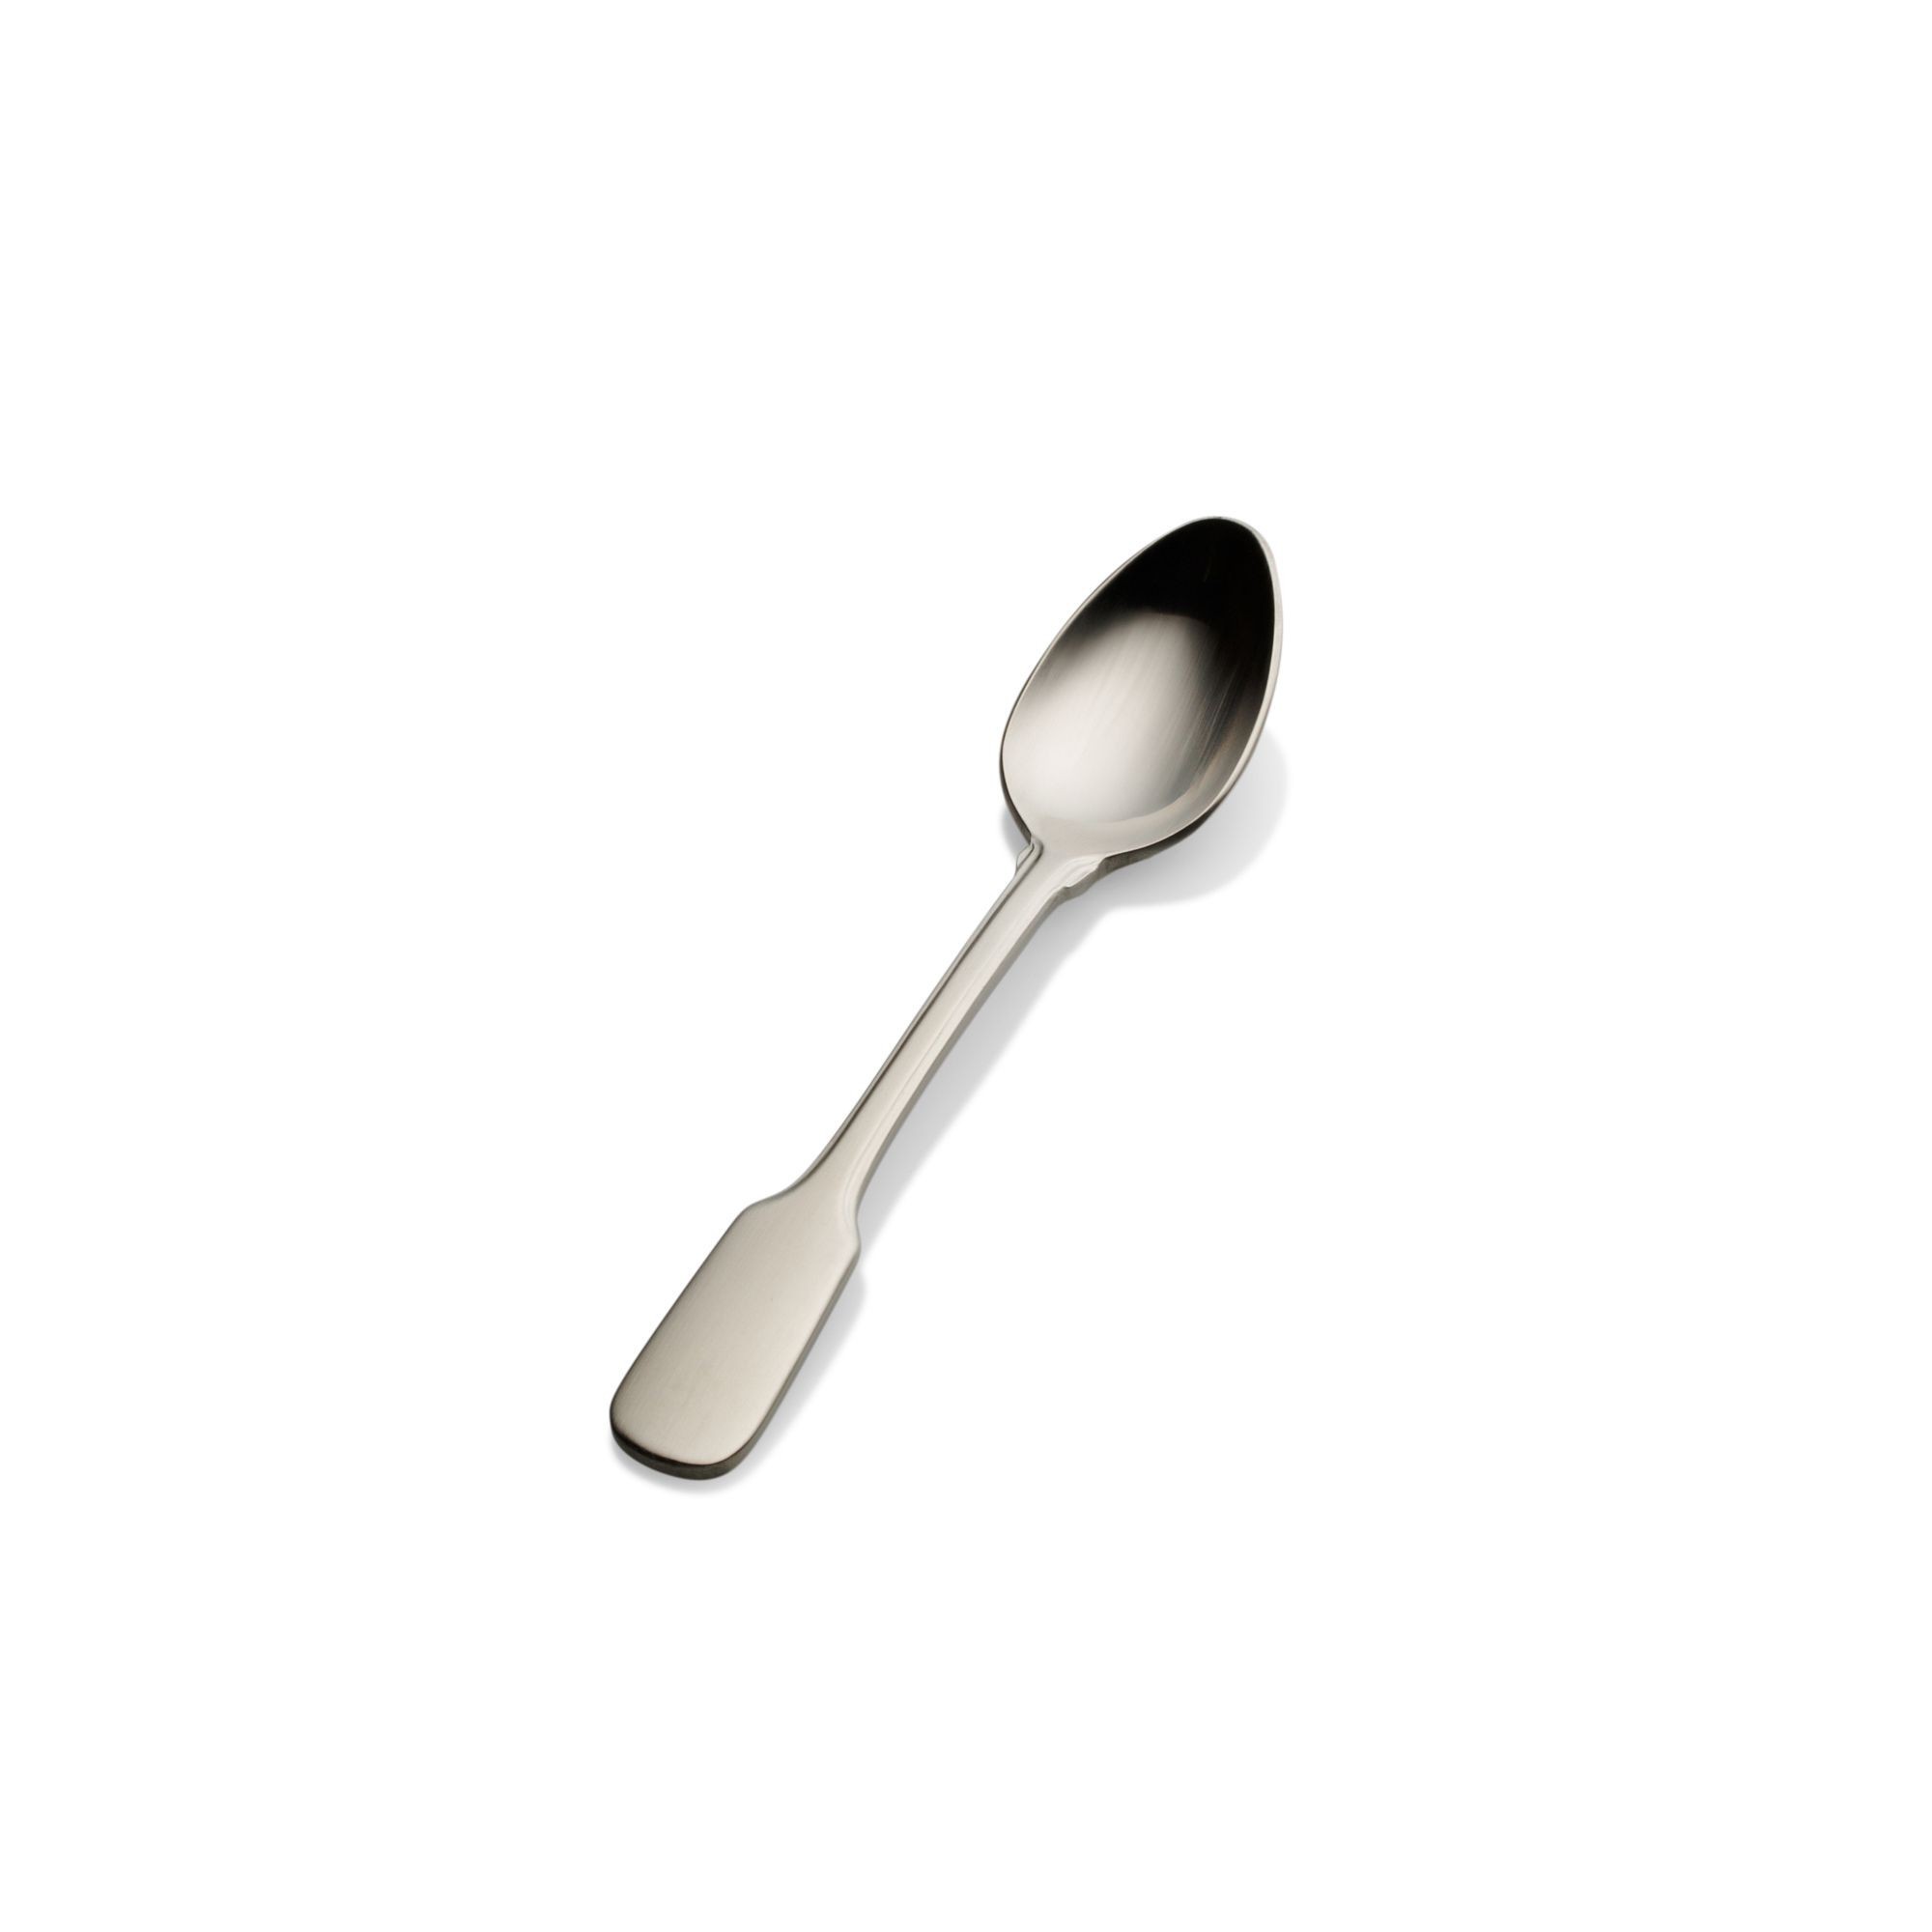 Bon Chef S1916S Liberty 18/8 Stainless Steel Silverplated Demitasse Spoon